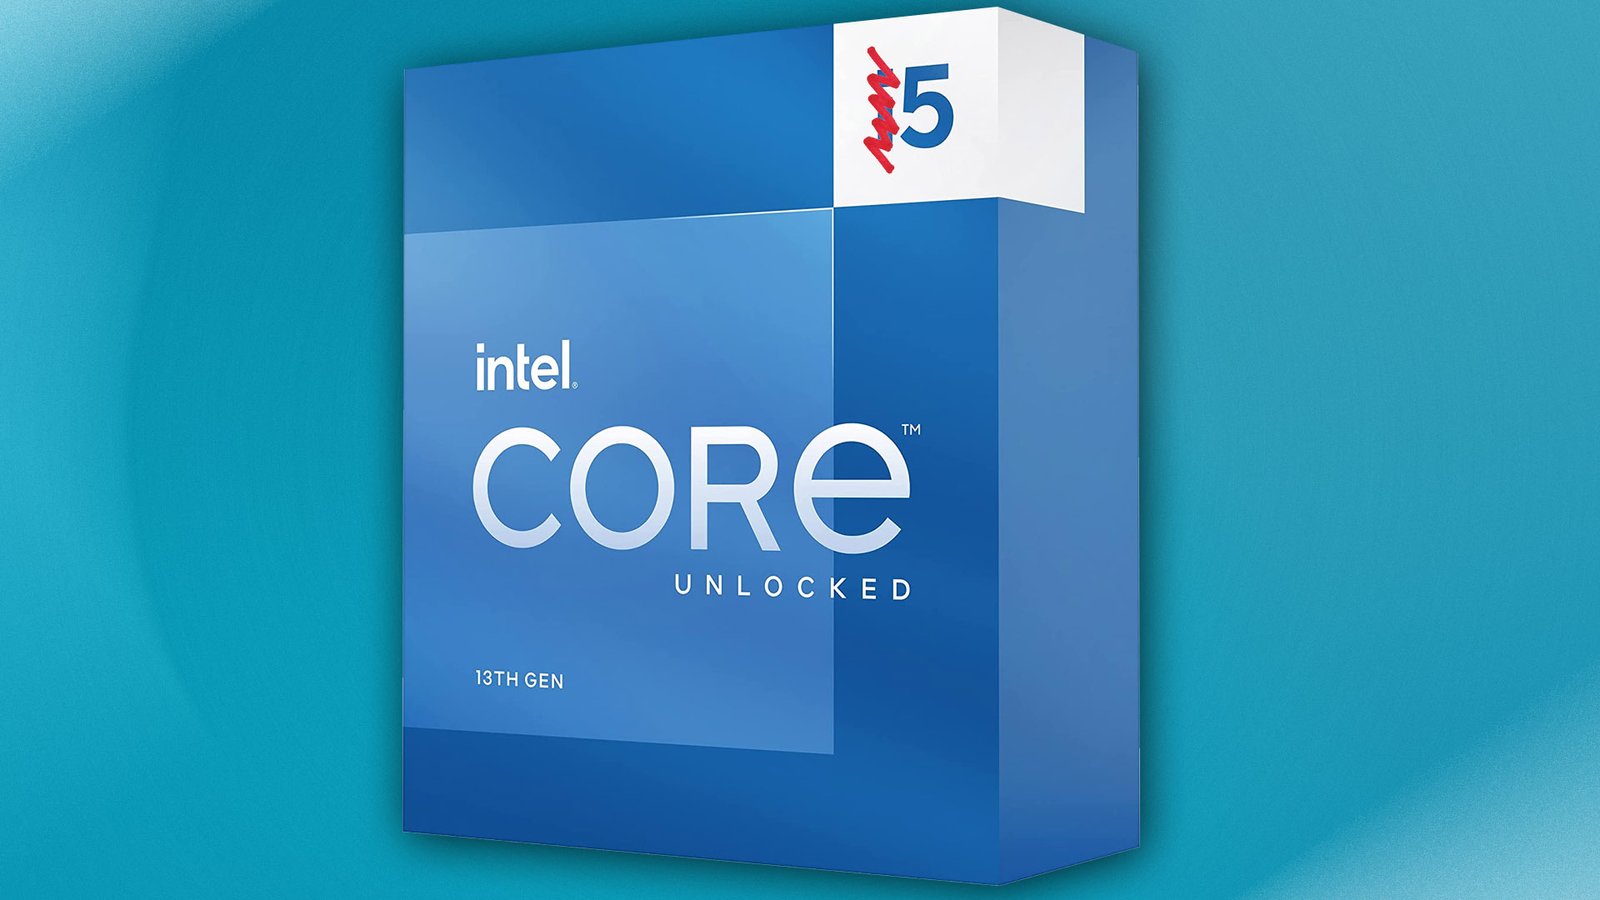 Intel can also drop the enduring “i” from future Core CPU names